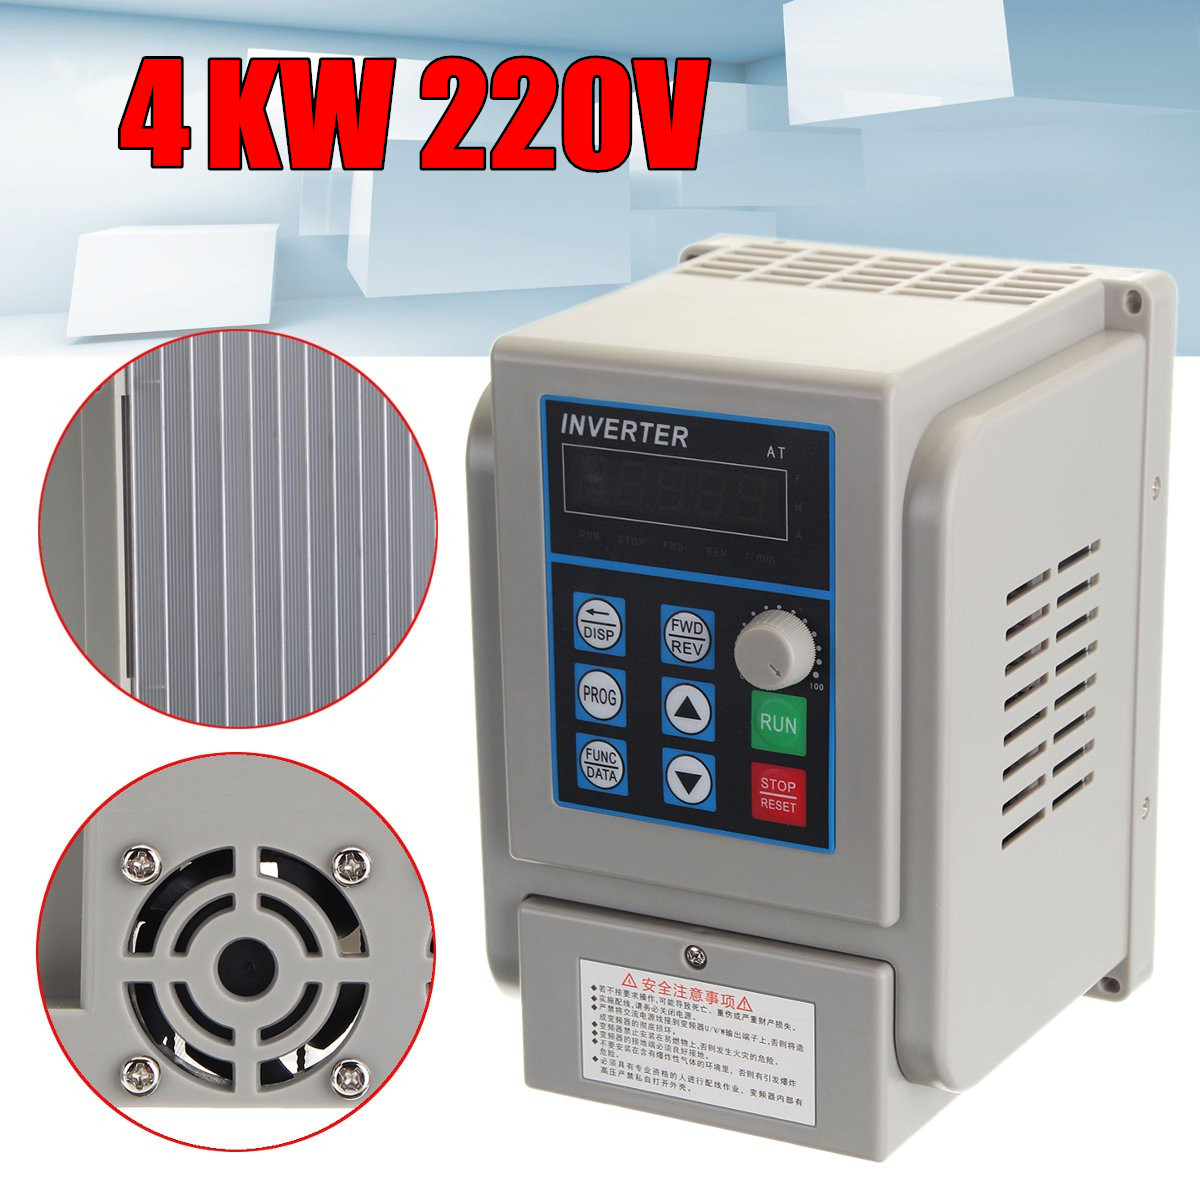 4KW-220V-20A-Single-Phase-Input-3-Phase-Output-PWM-Frequency-Converter-Drive-Inverter-5HP-VFD-VSD-1286175-1